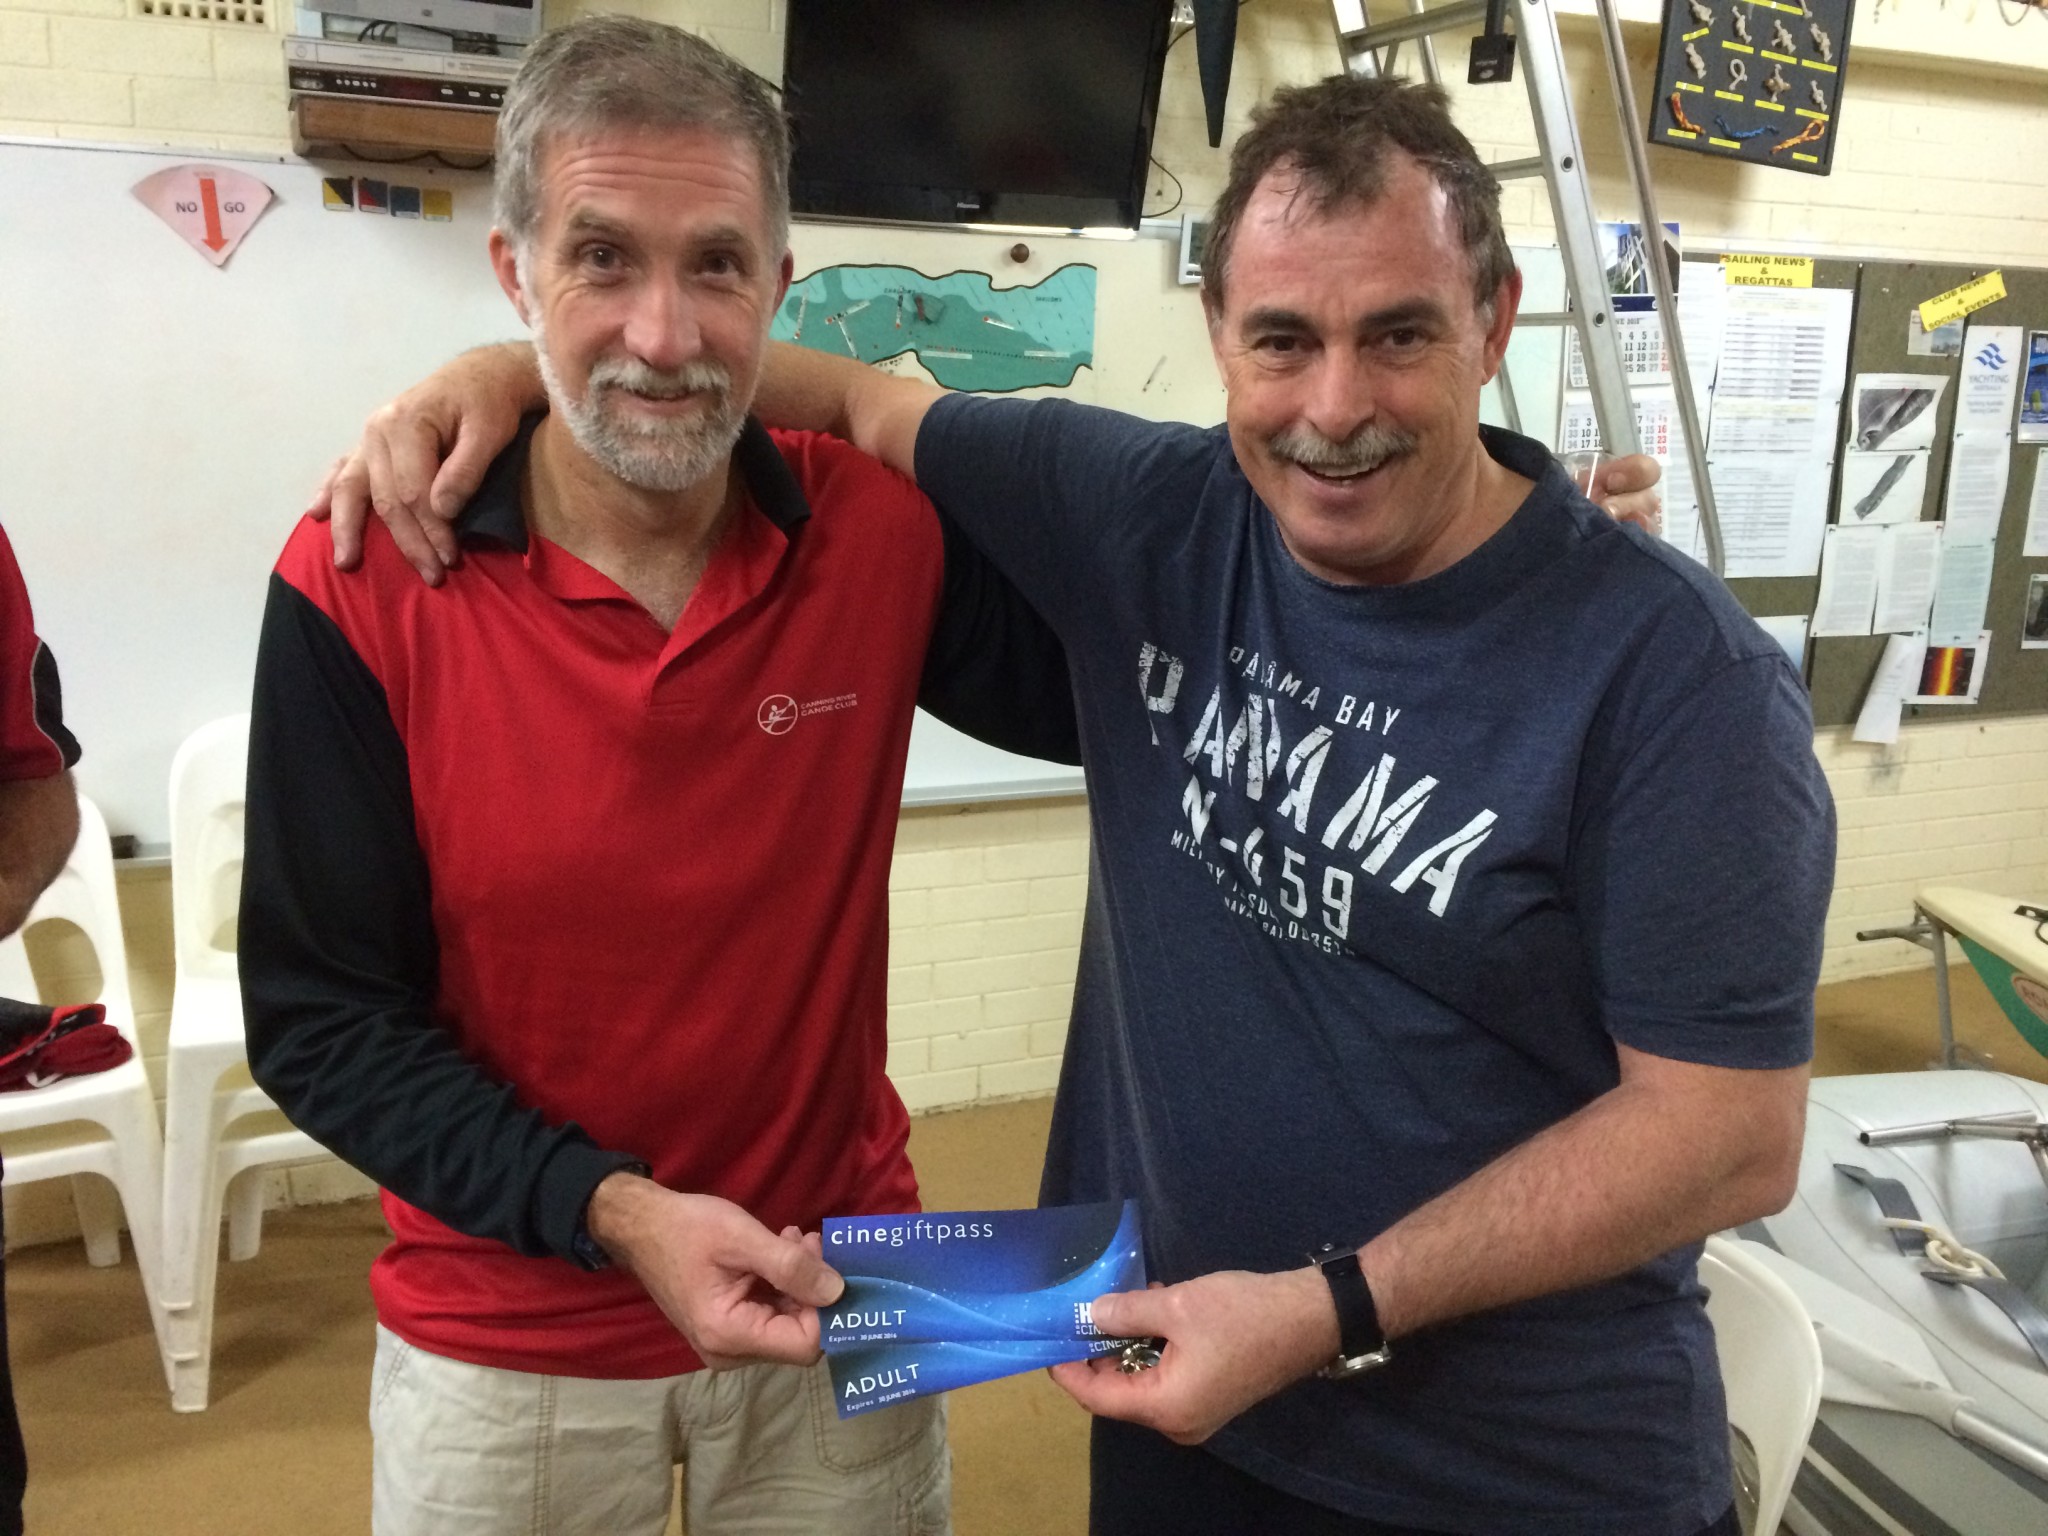 Tuesday 25th August 2015 Club member Louis Botes presenting tonight's winner Steve & Cindy Coward with movie vouchers (Cindy had to leave)